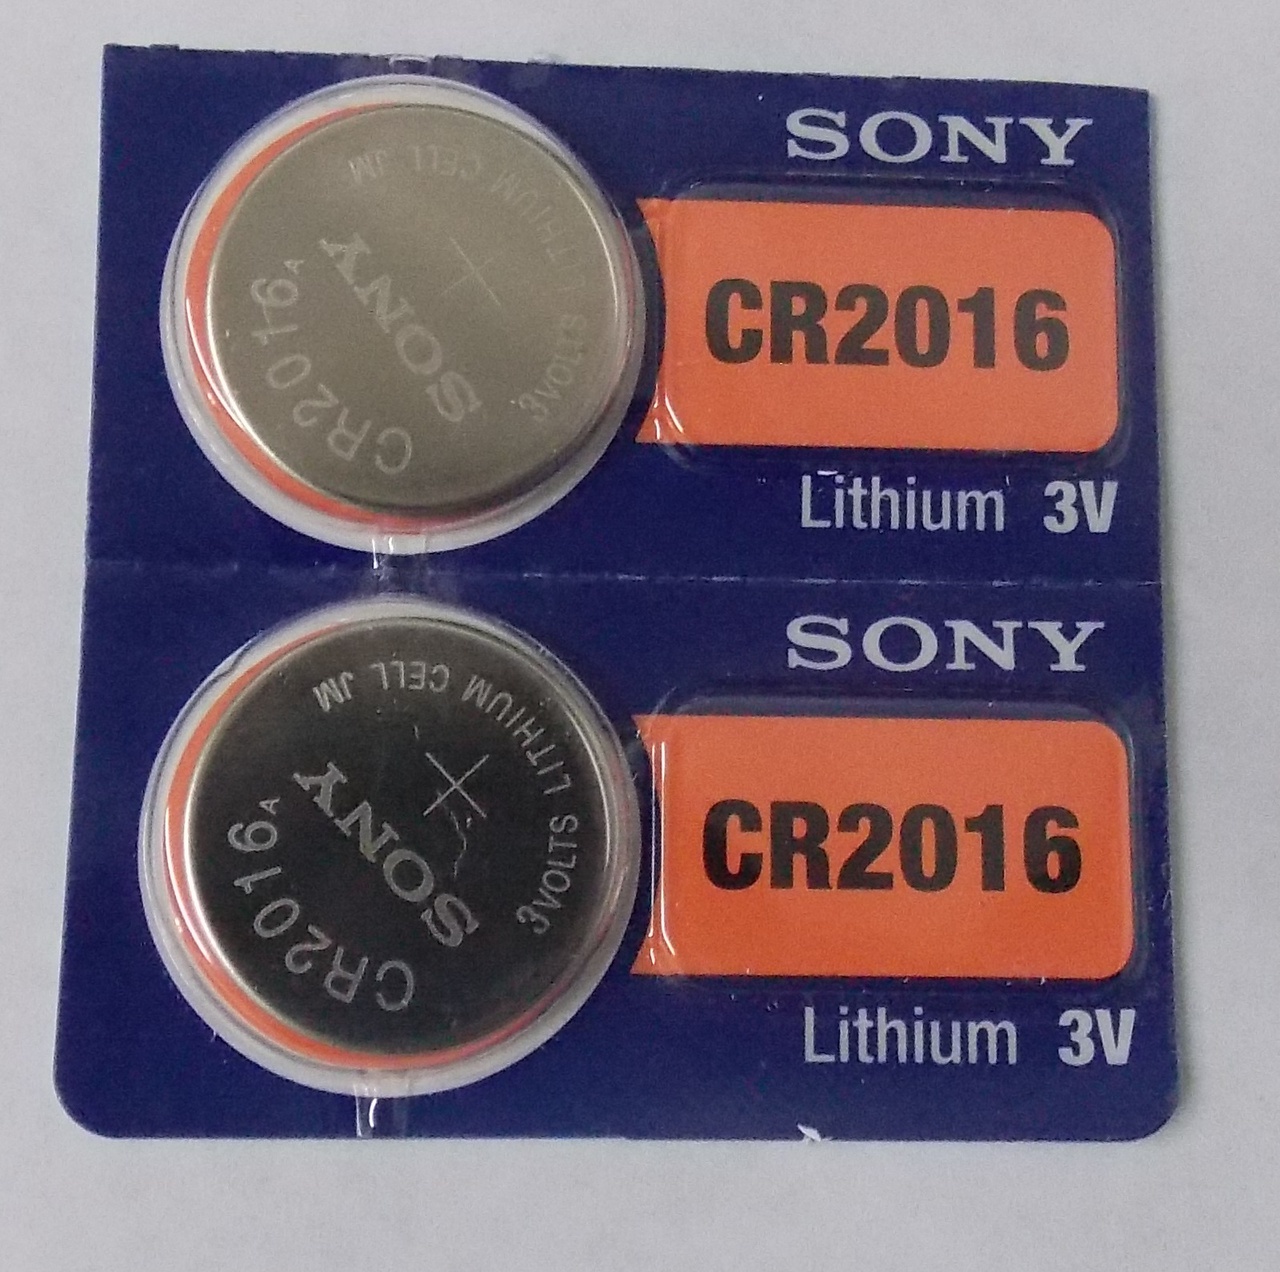 Sony CR2016 3V Lithium Coin Battery - 2 Pack + FREE SHIPPING